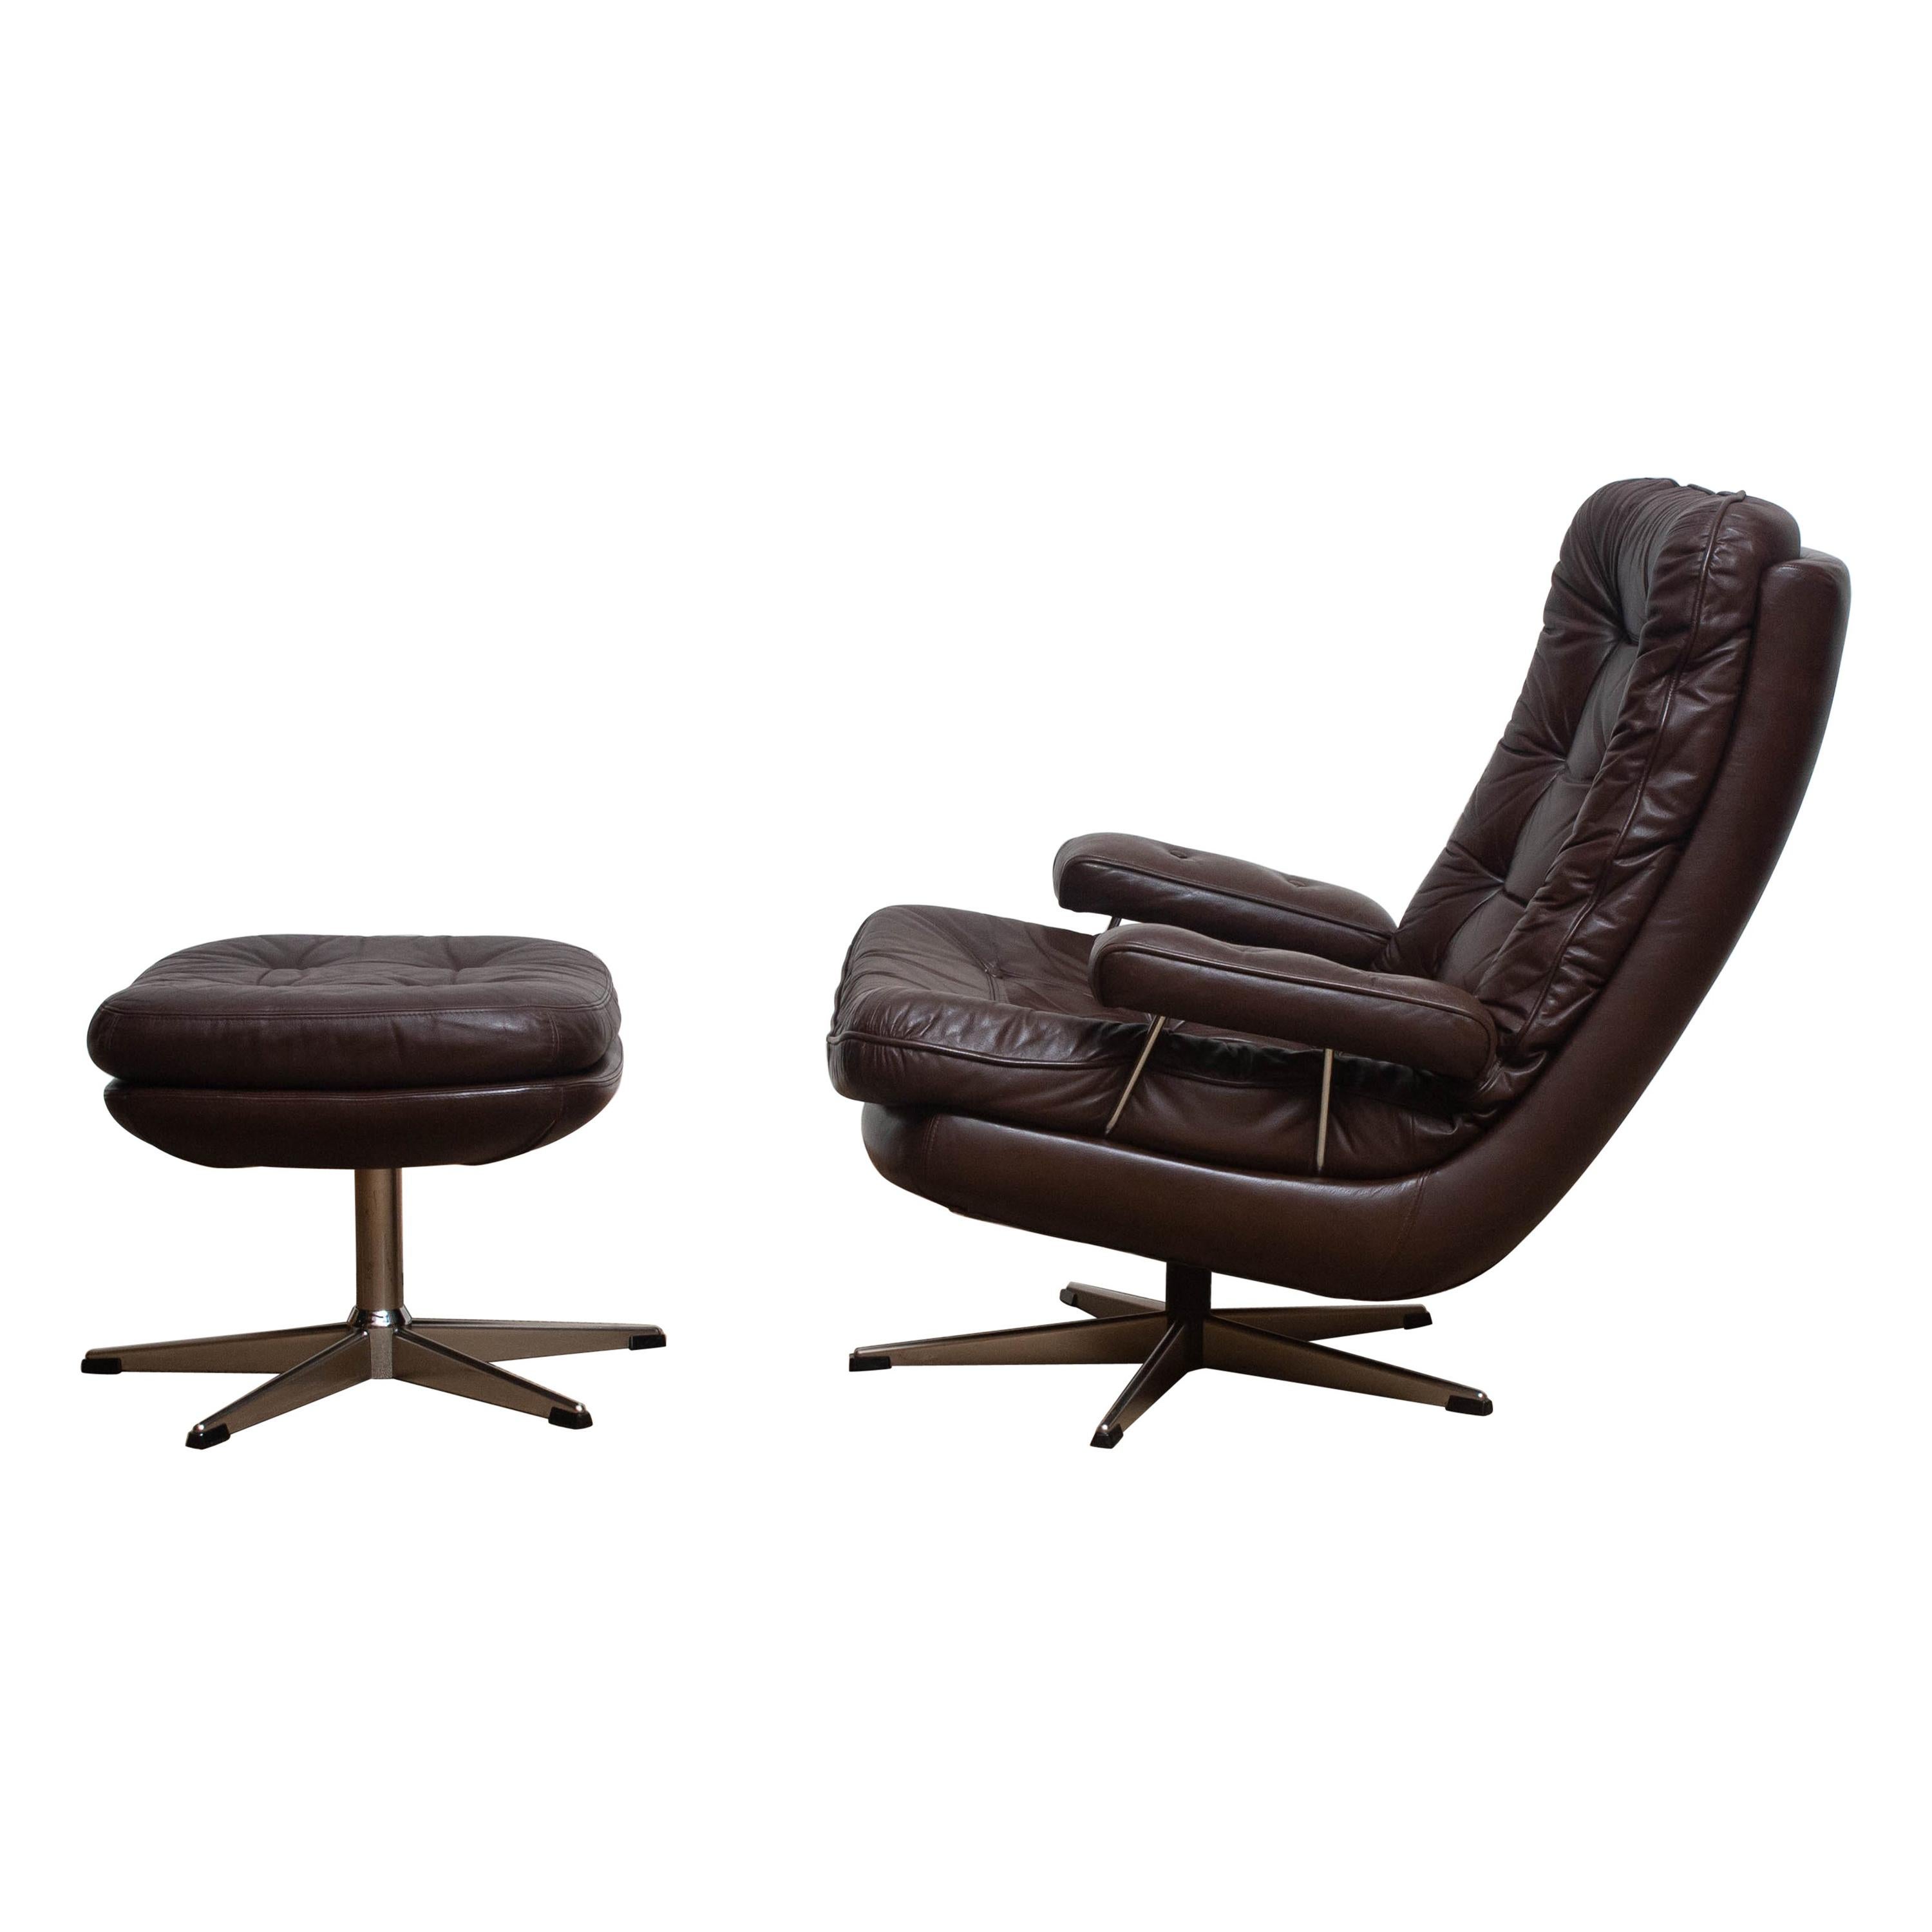 Beautiful swivel lounge chair and ottoman, Sweden.
The chair and ottoman have a dark brown leather seating on a chromed swivel frame.
It is in a mint condition,
circa 1970s.
Dimensions: H 90 cm x W 78 cm x D 93 cm x SH 40 cm.